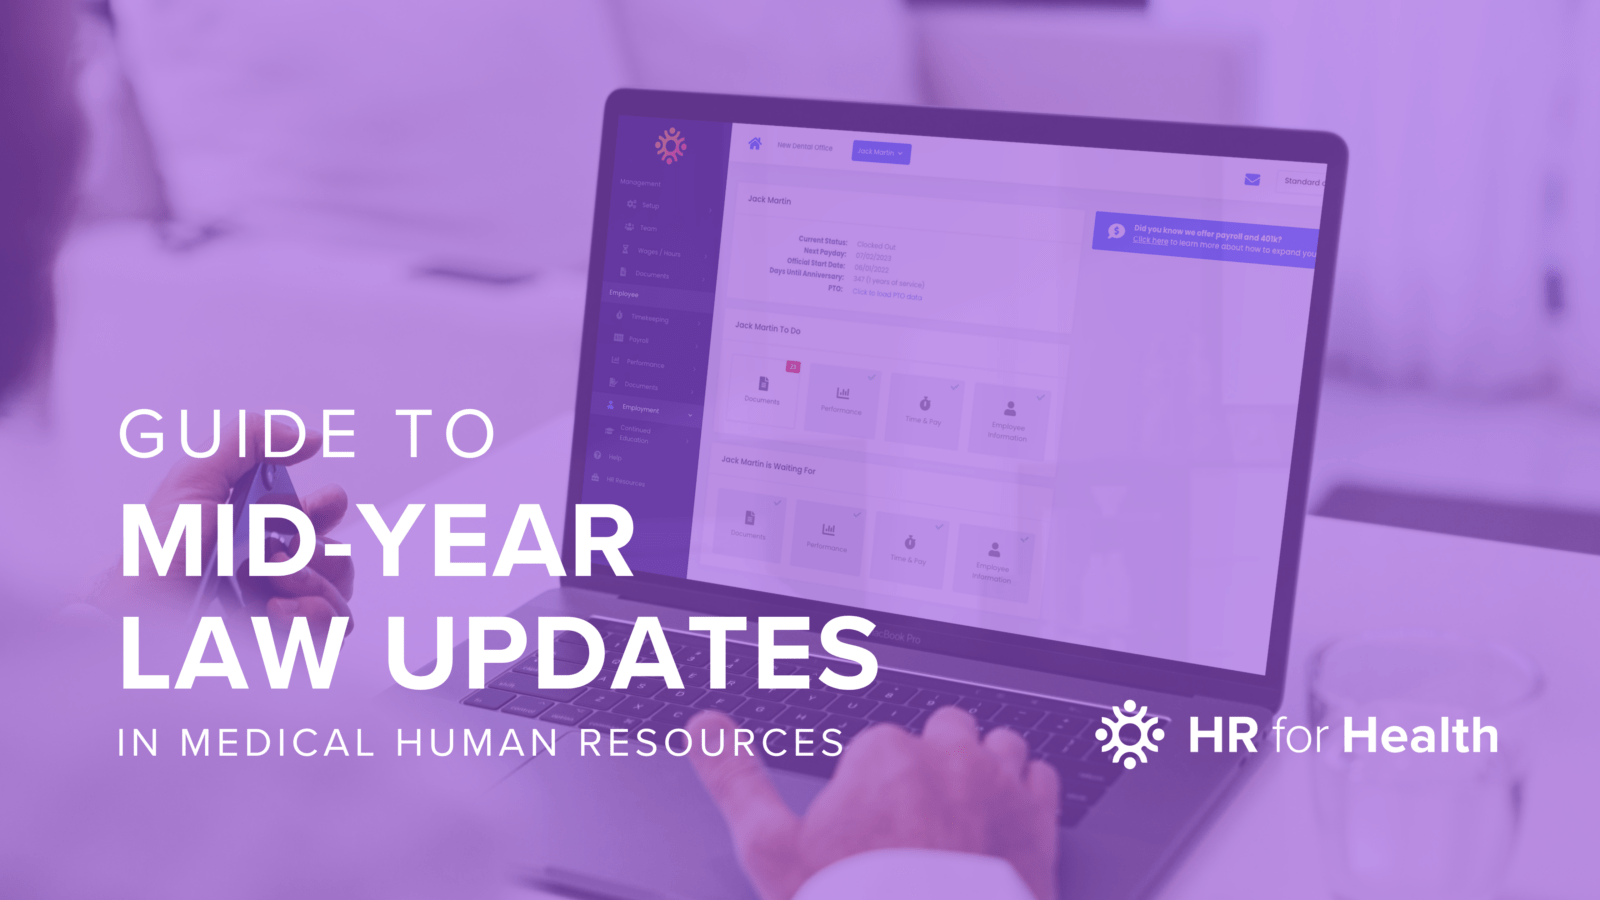 A Comprehensive Guide to Mid-Year Law Updates in Medical Human Resources